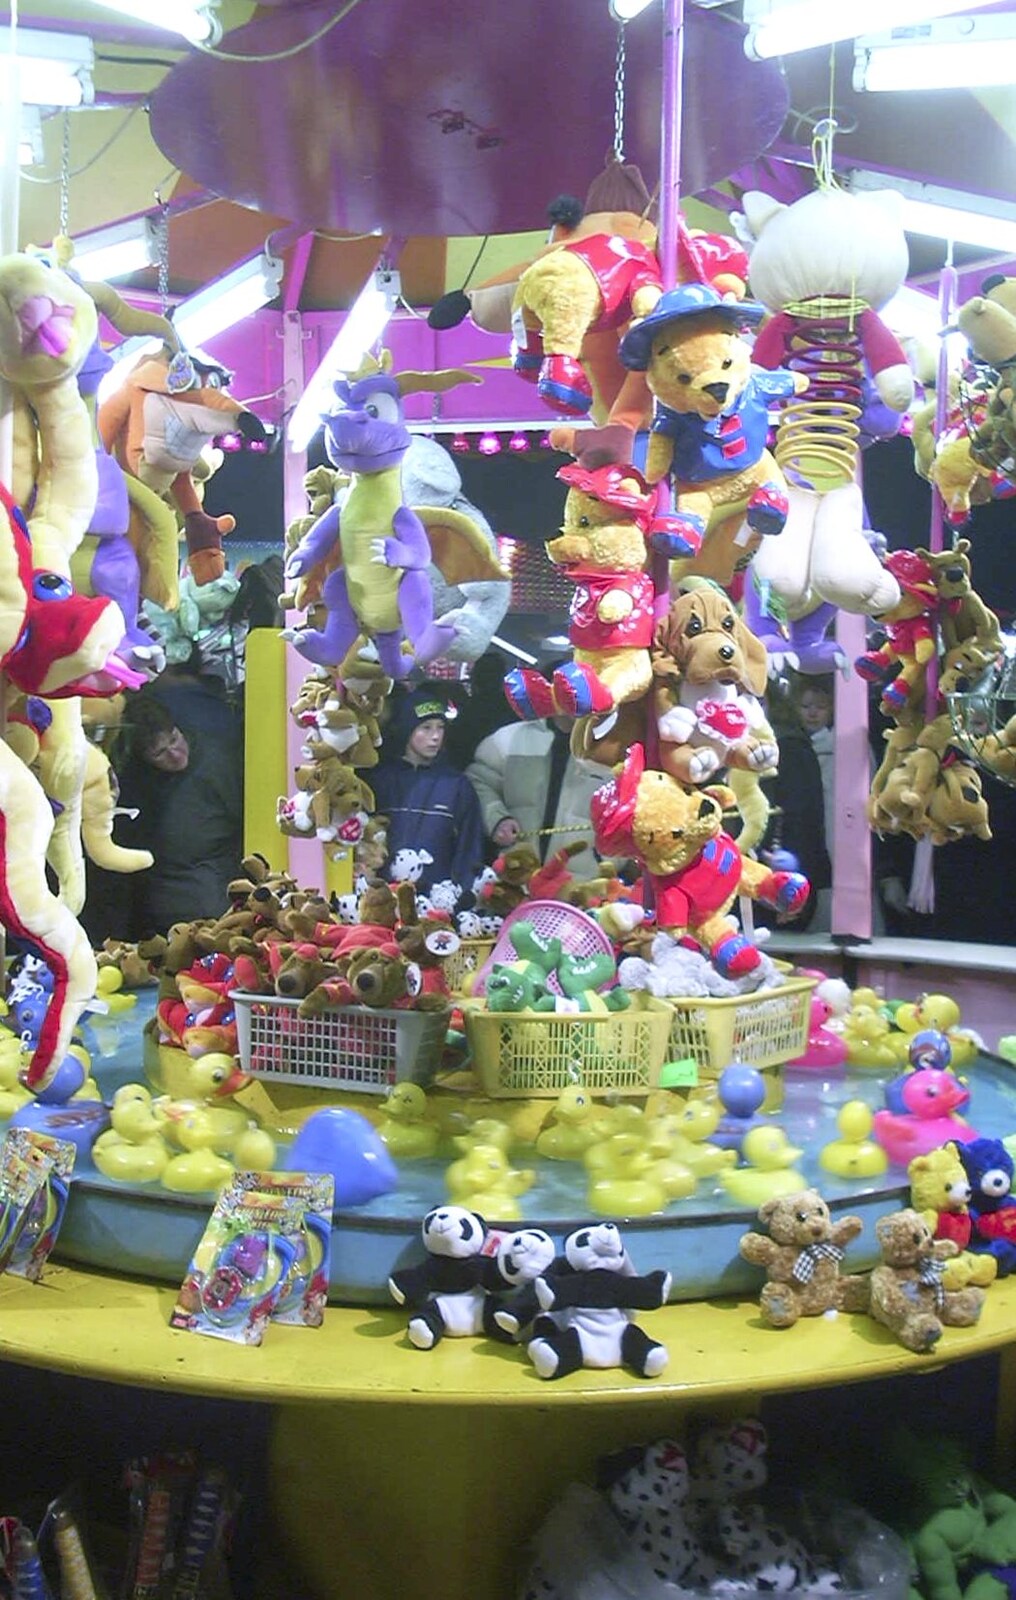 Revolving plastic ducks from Fireworks and Fairgrounds with Mikey P, Fair Green, Diss, Norfolk - 5th November 2003